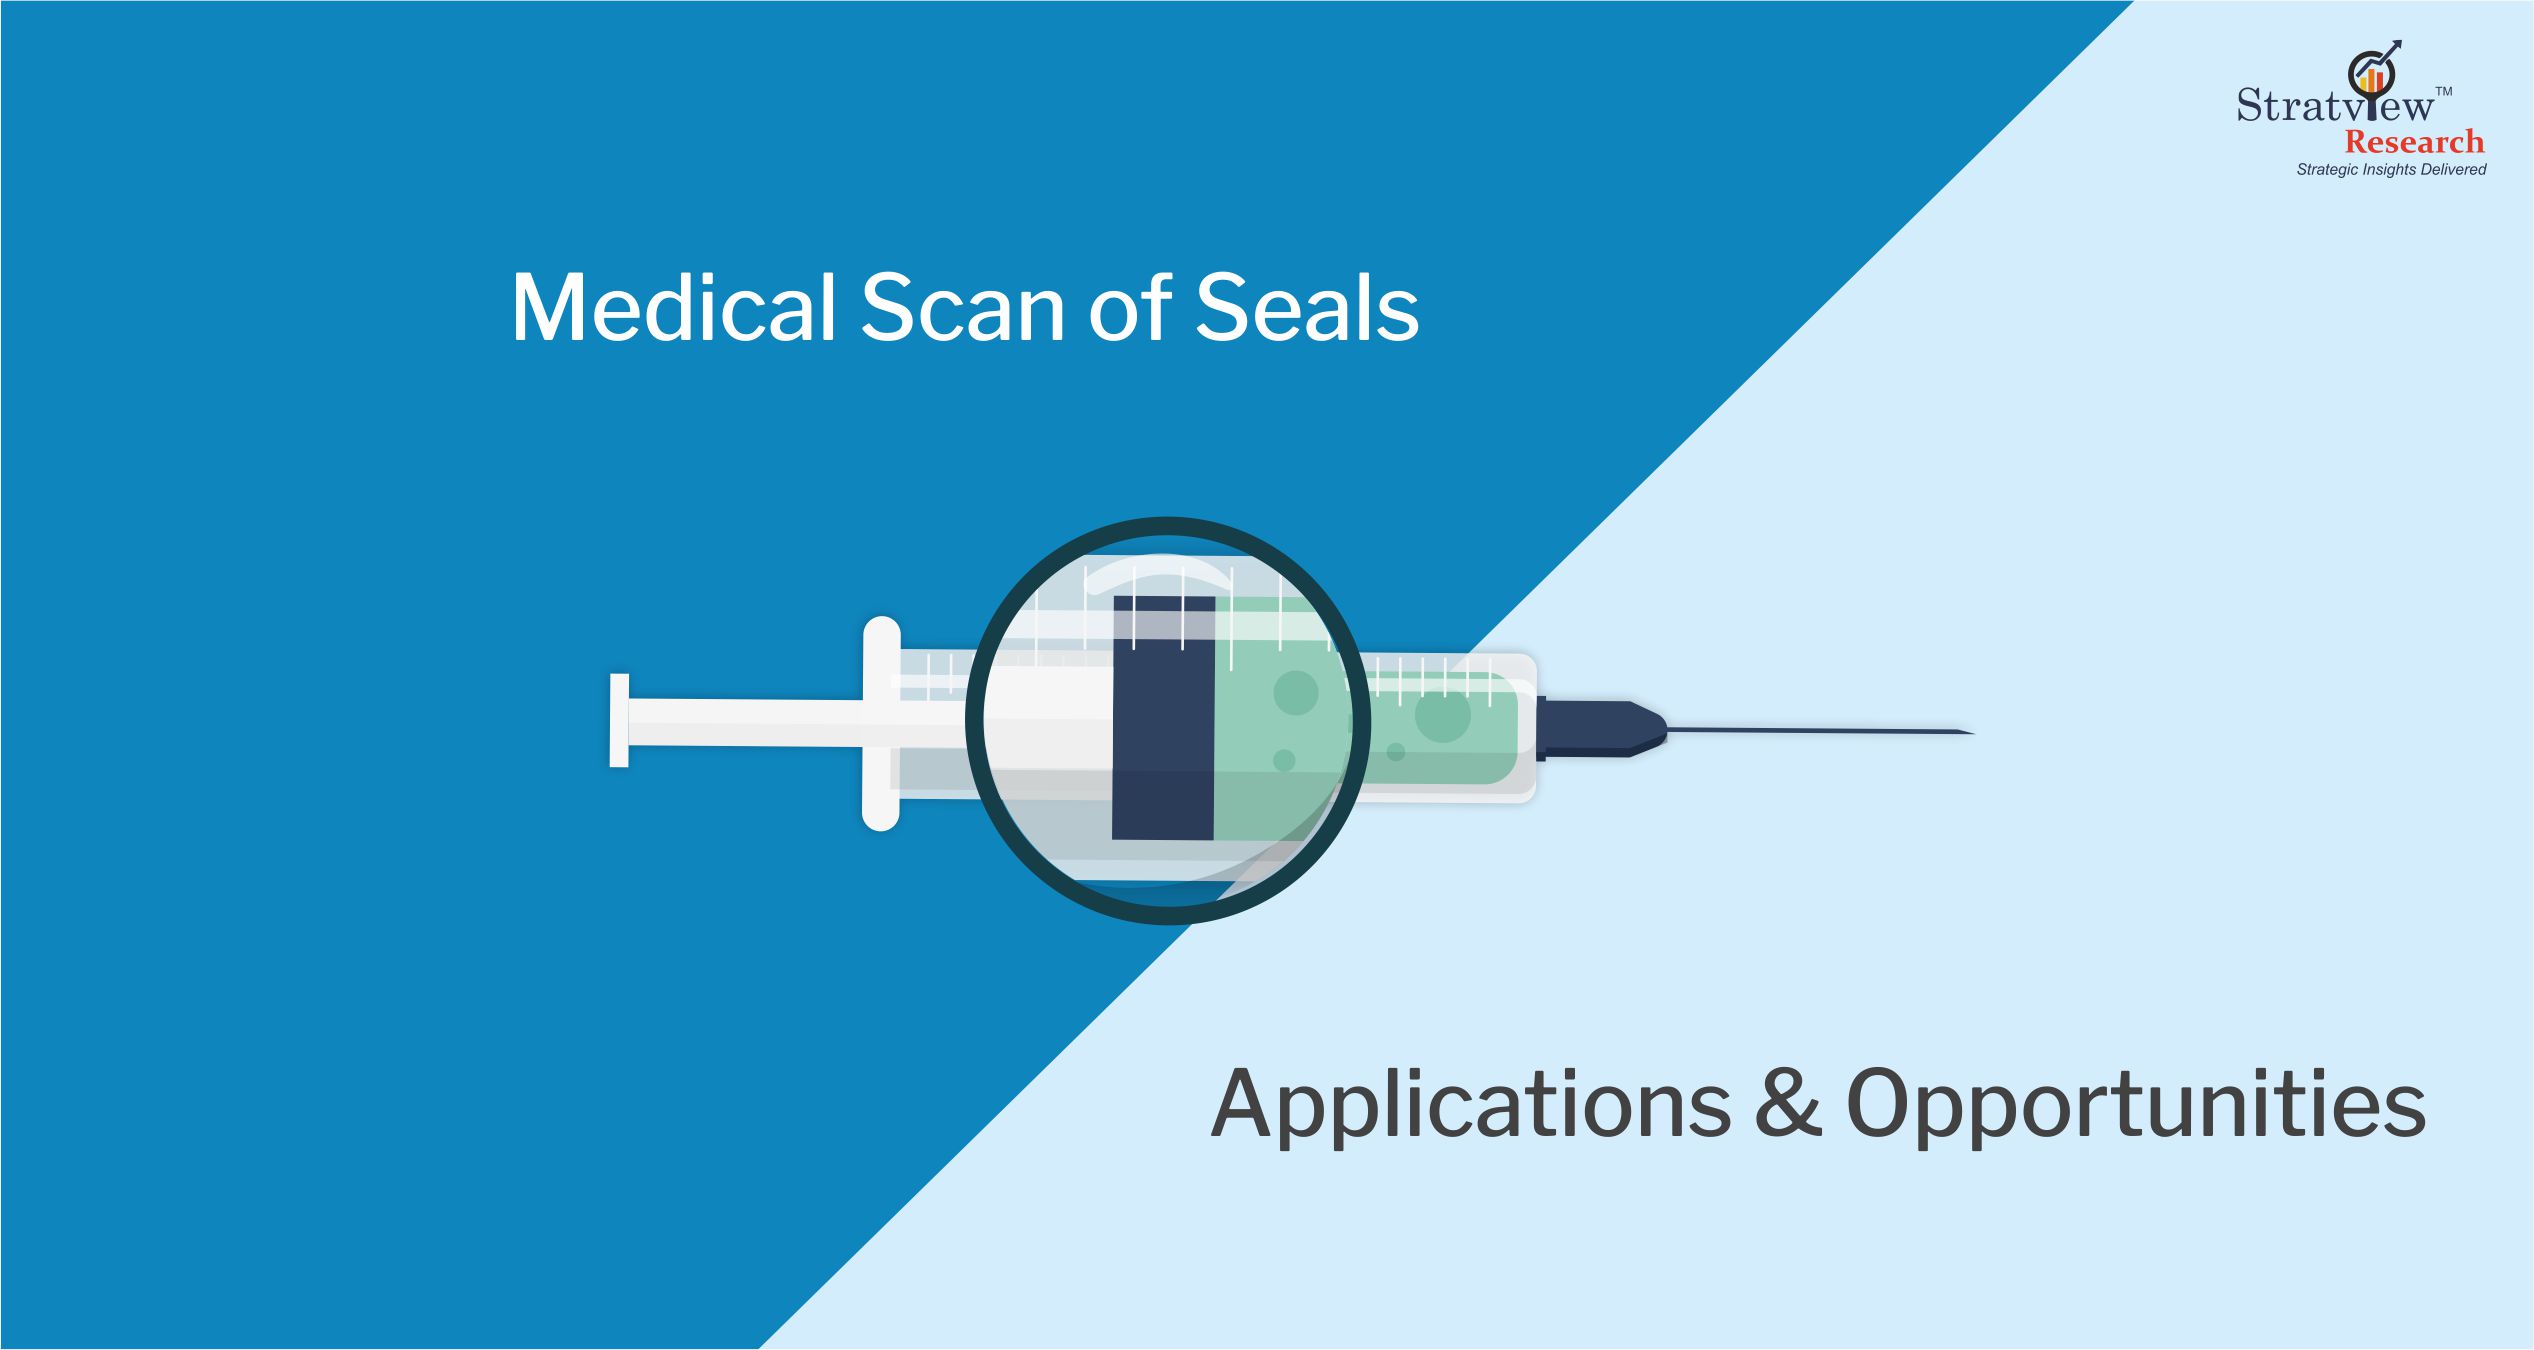 Medical Scan of Seals: Applications & Opportunities